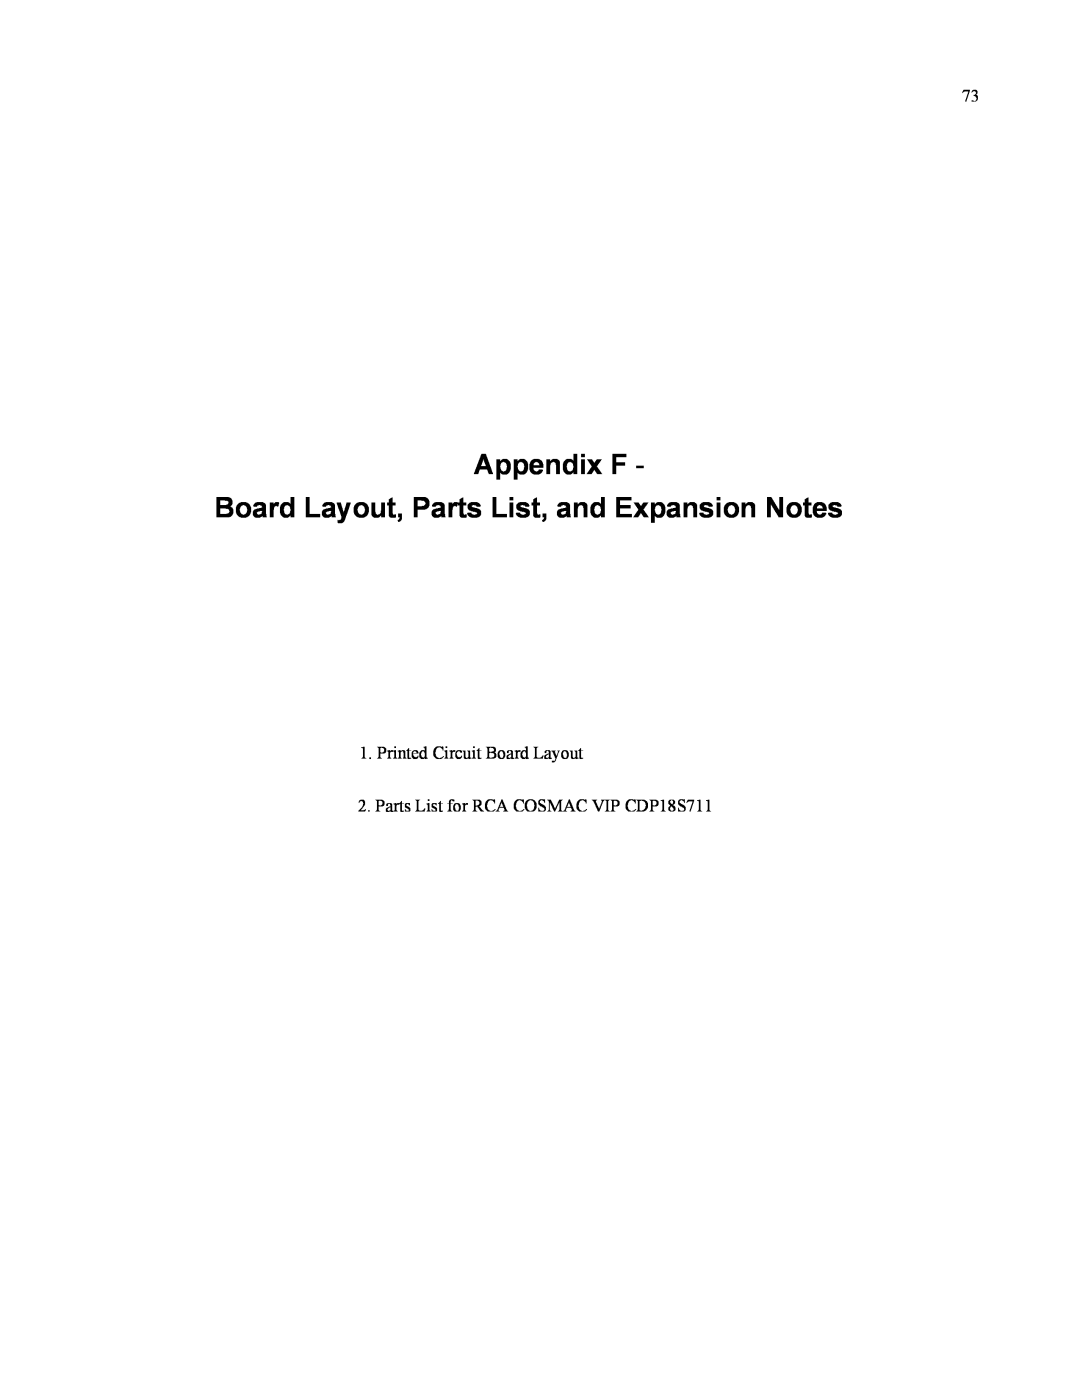 RCA CDP18S711 manual Appendix F, Board Layout, Parts List, and Expansion Notes, Printed Circuit Board Layout 